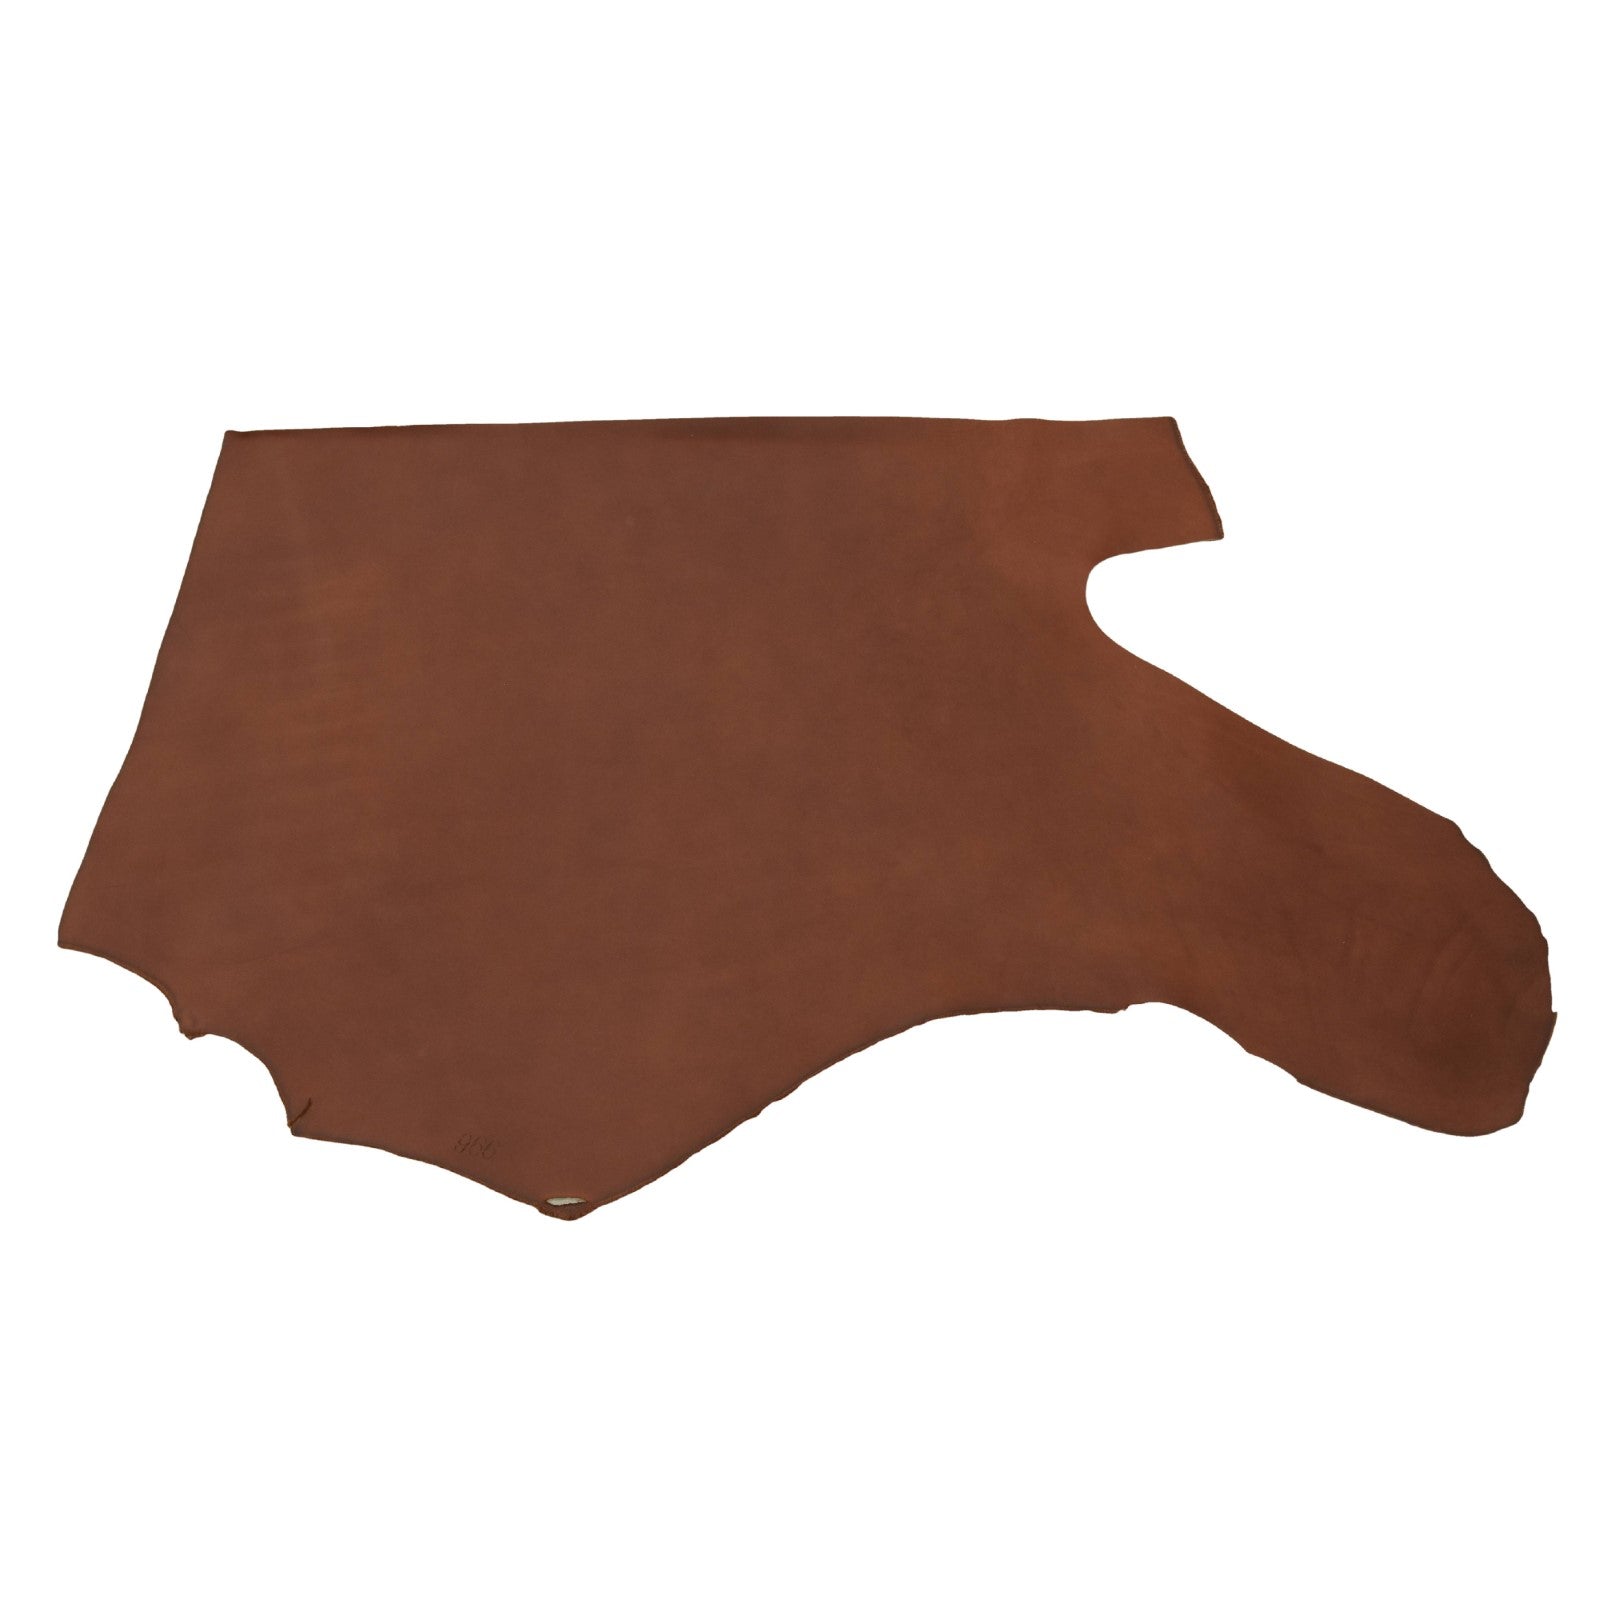 Dark Brown Whiskey River, Oil Tanned Hides, Summits Edge, 6.5-7.5/21-26 Sq Ft, Bottom Piece / 6.5 - 7.5 Sq Ft | The Leather Guy